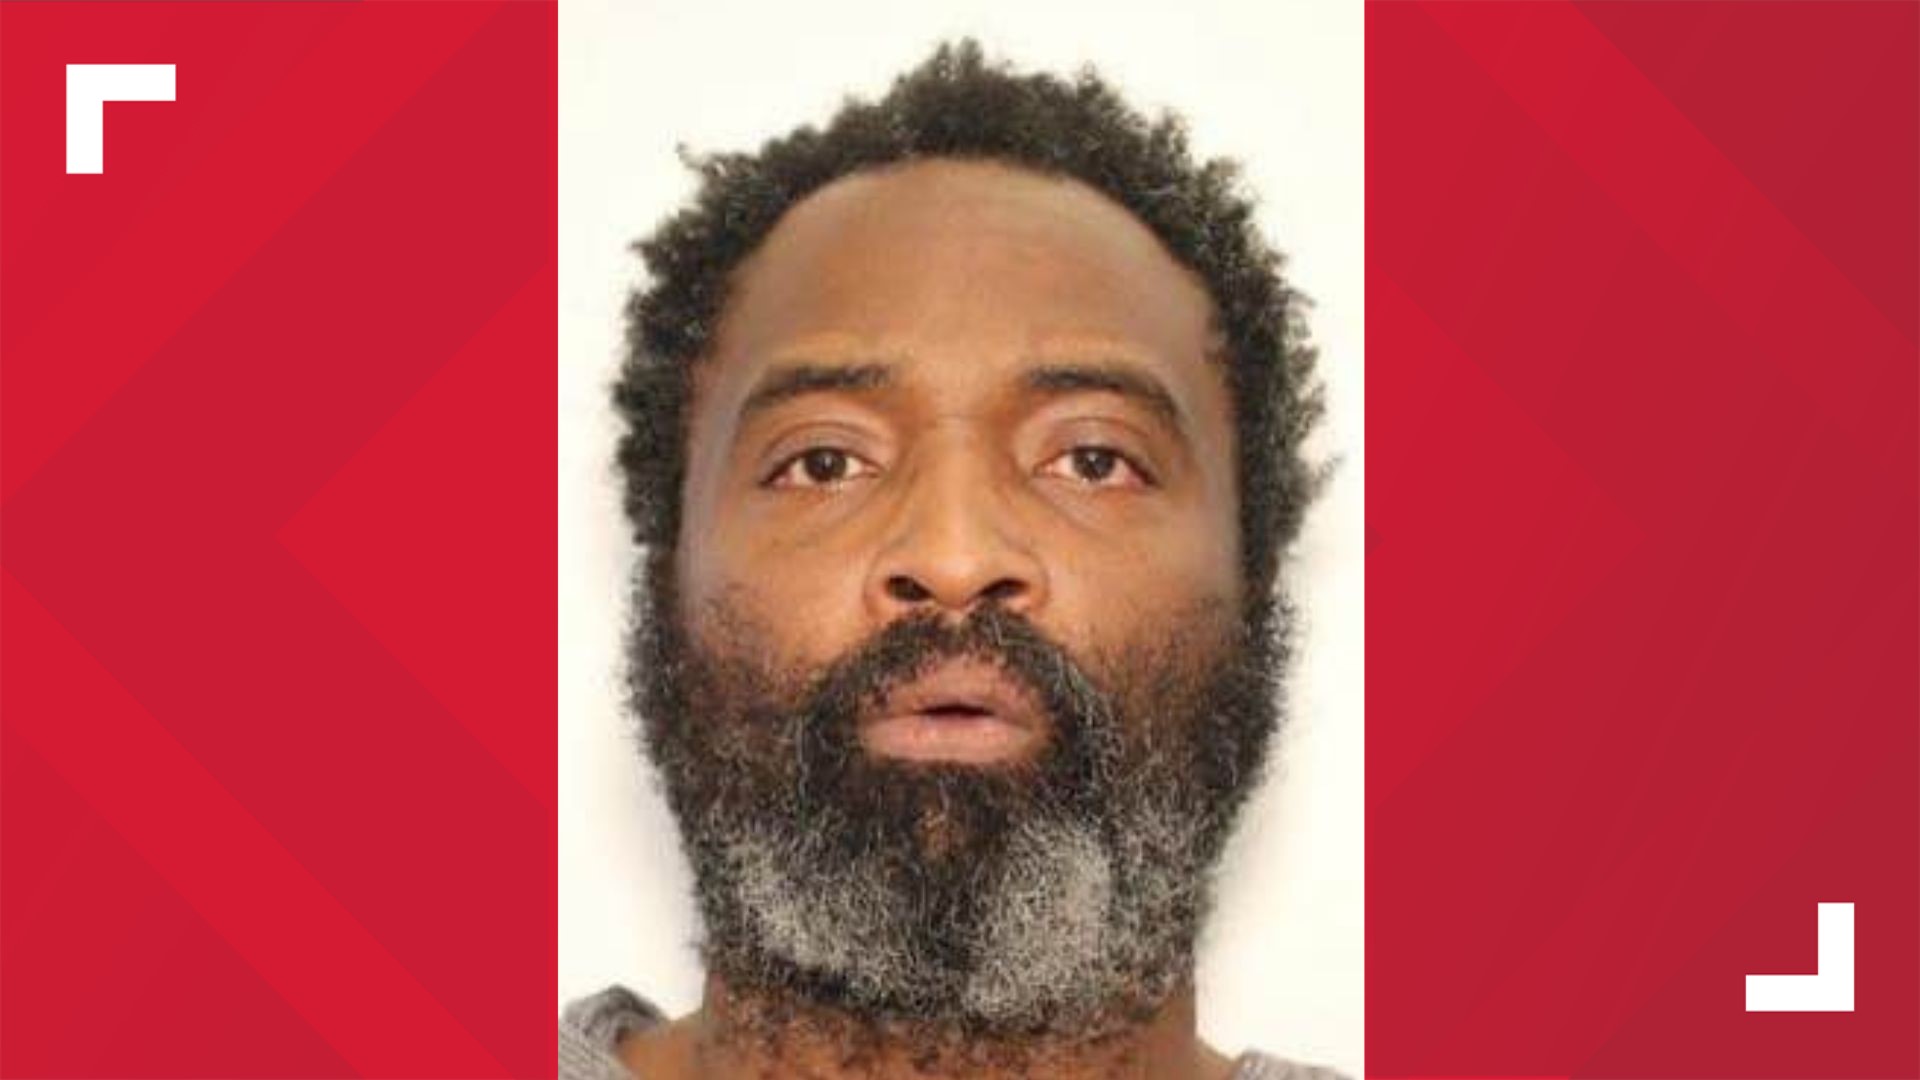 The suspect was identified as 41-year-old Andre Longmore who has warrants out for his arrest for murder.